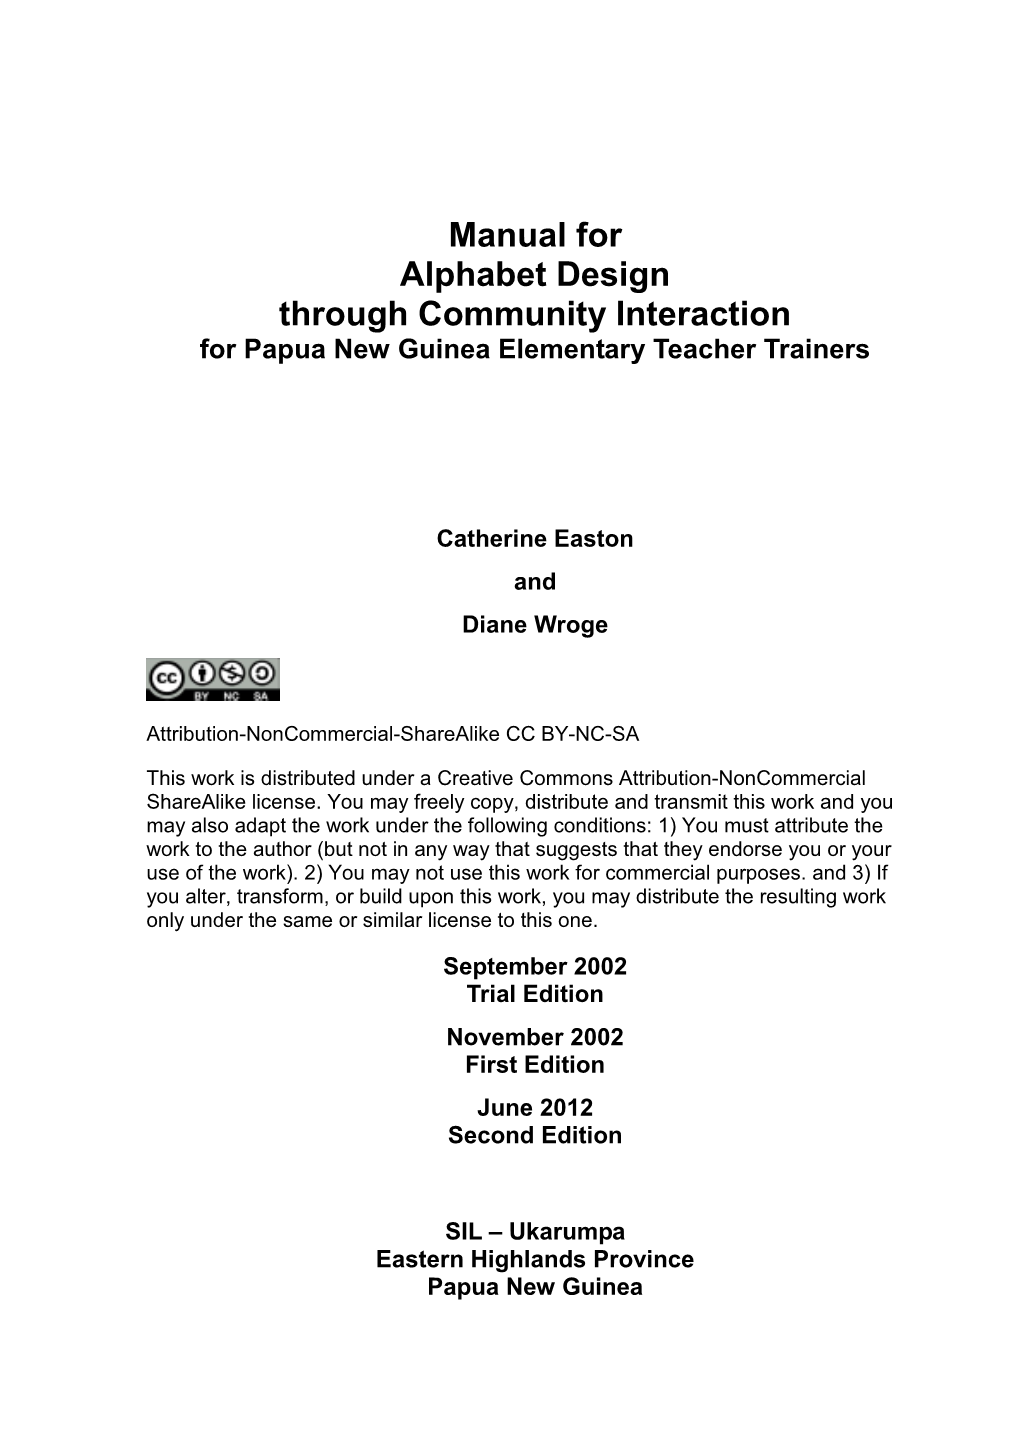 Manual for Alphabet Design Through Community Interaction for Papua New Guinea Elementary Teacher Trainers